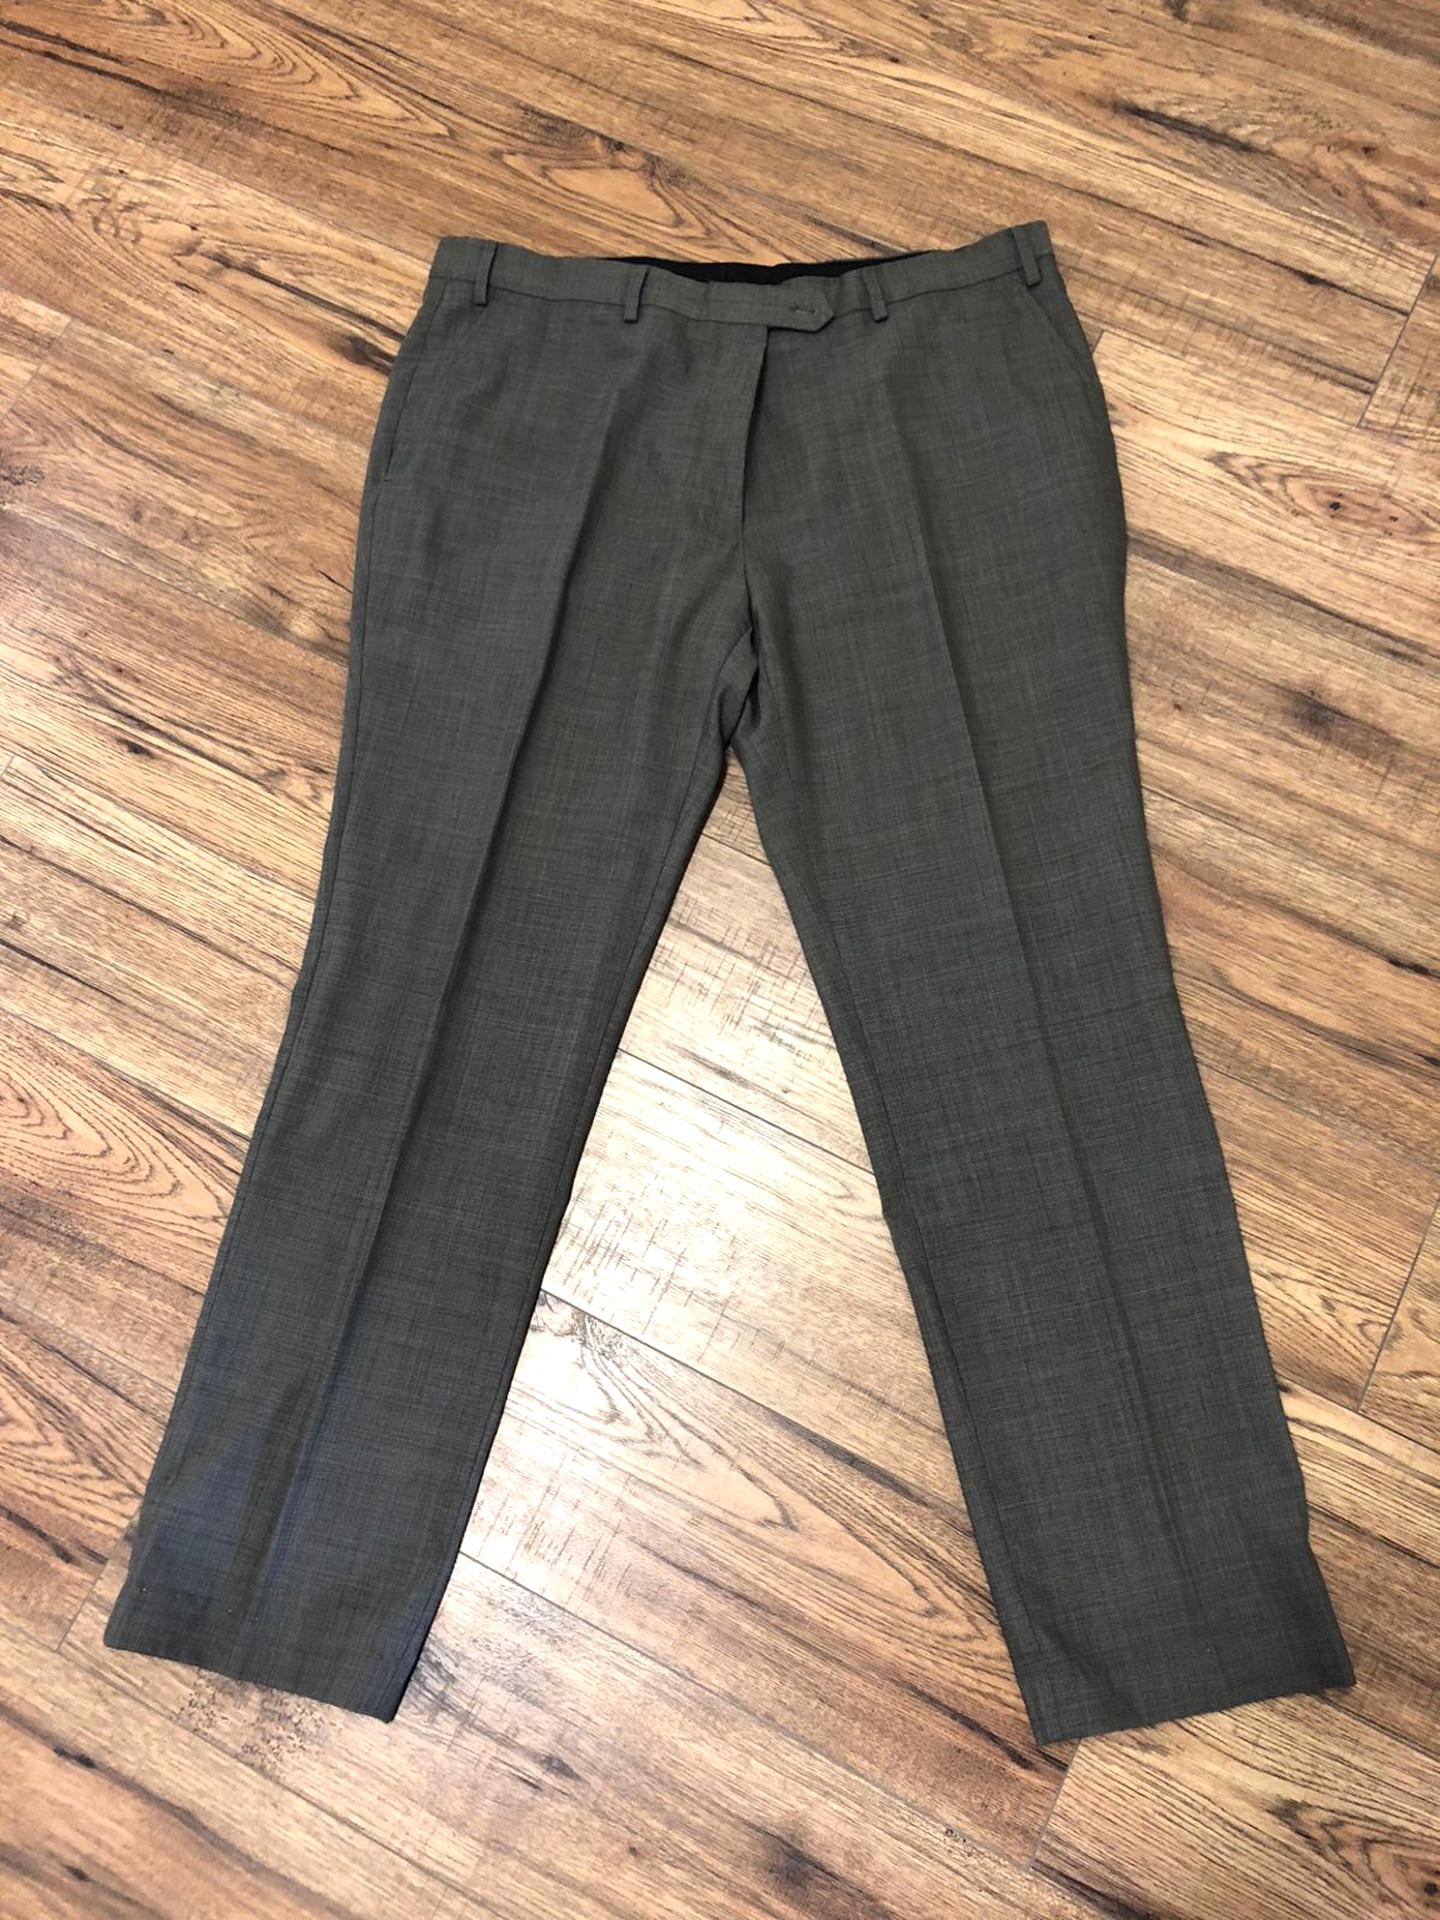 Mens Trousers 38 Waist for sale in UK | 89 used Mens Trousers 38 Waists